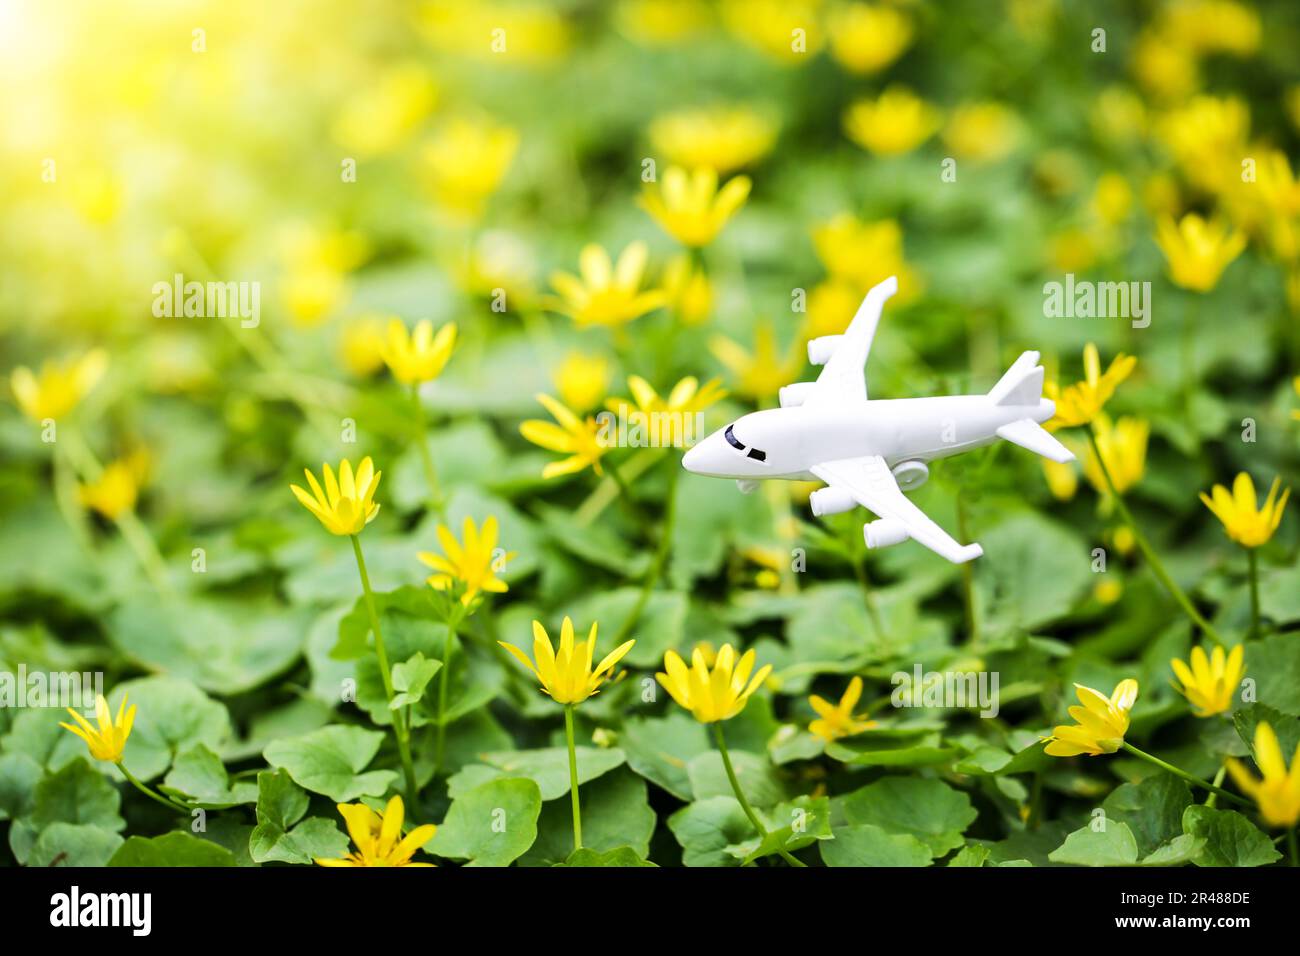 White airplane on flower fresh green leaves background. Sustainable travel. Clean green energy, biofuel for aviation industry. Sustainable aviation Stock Photo